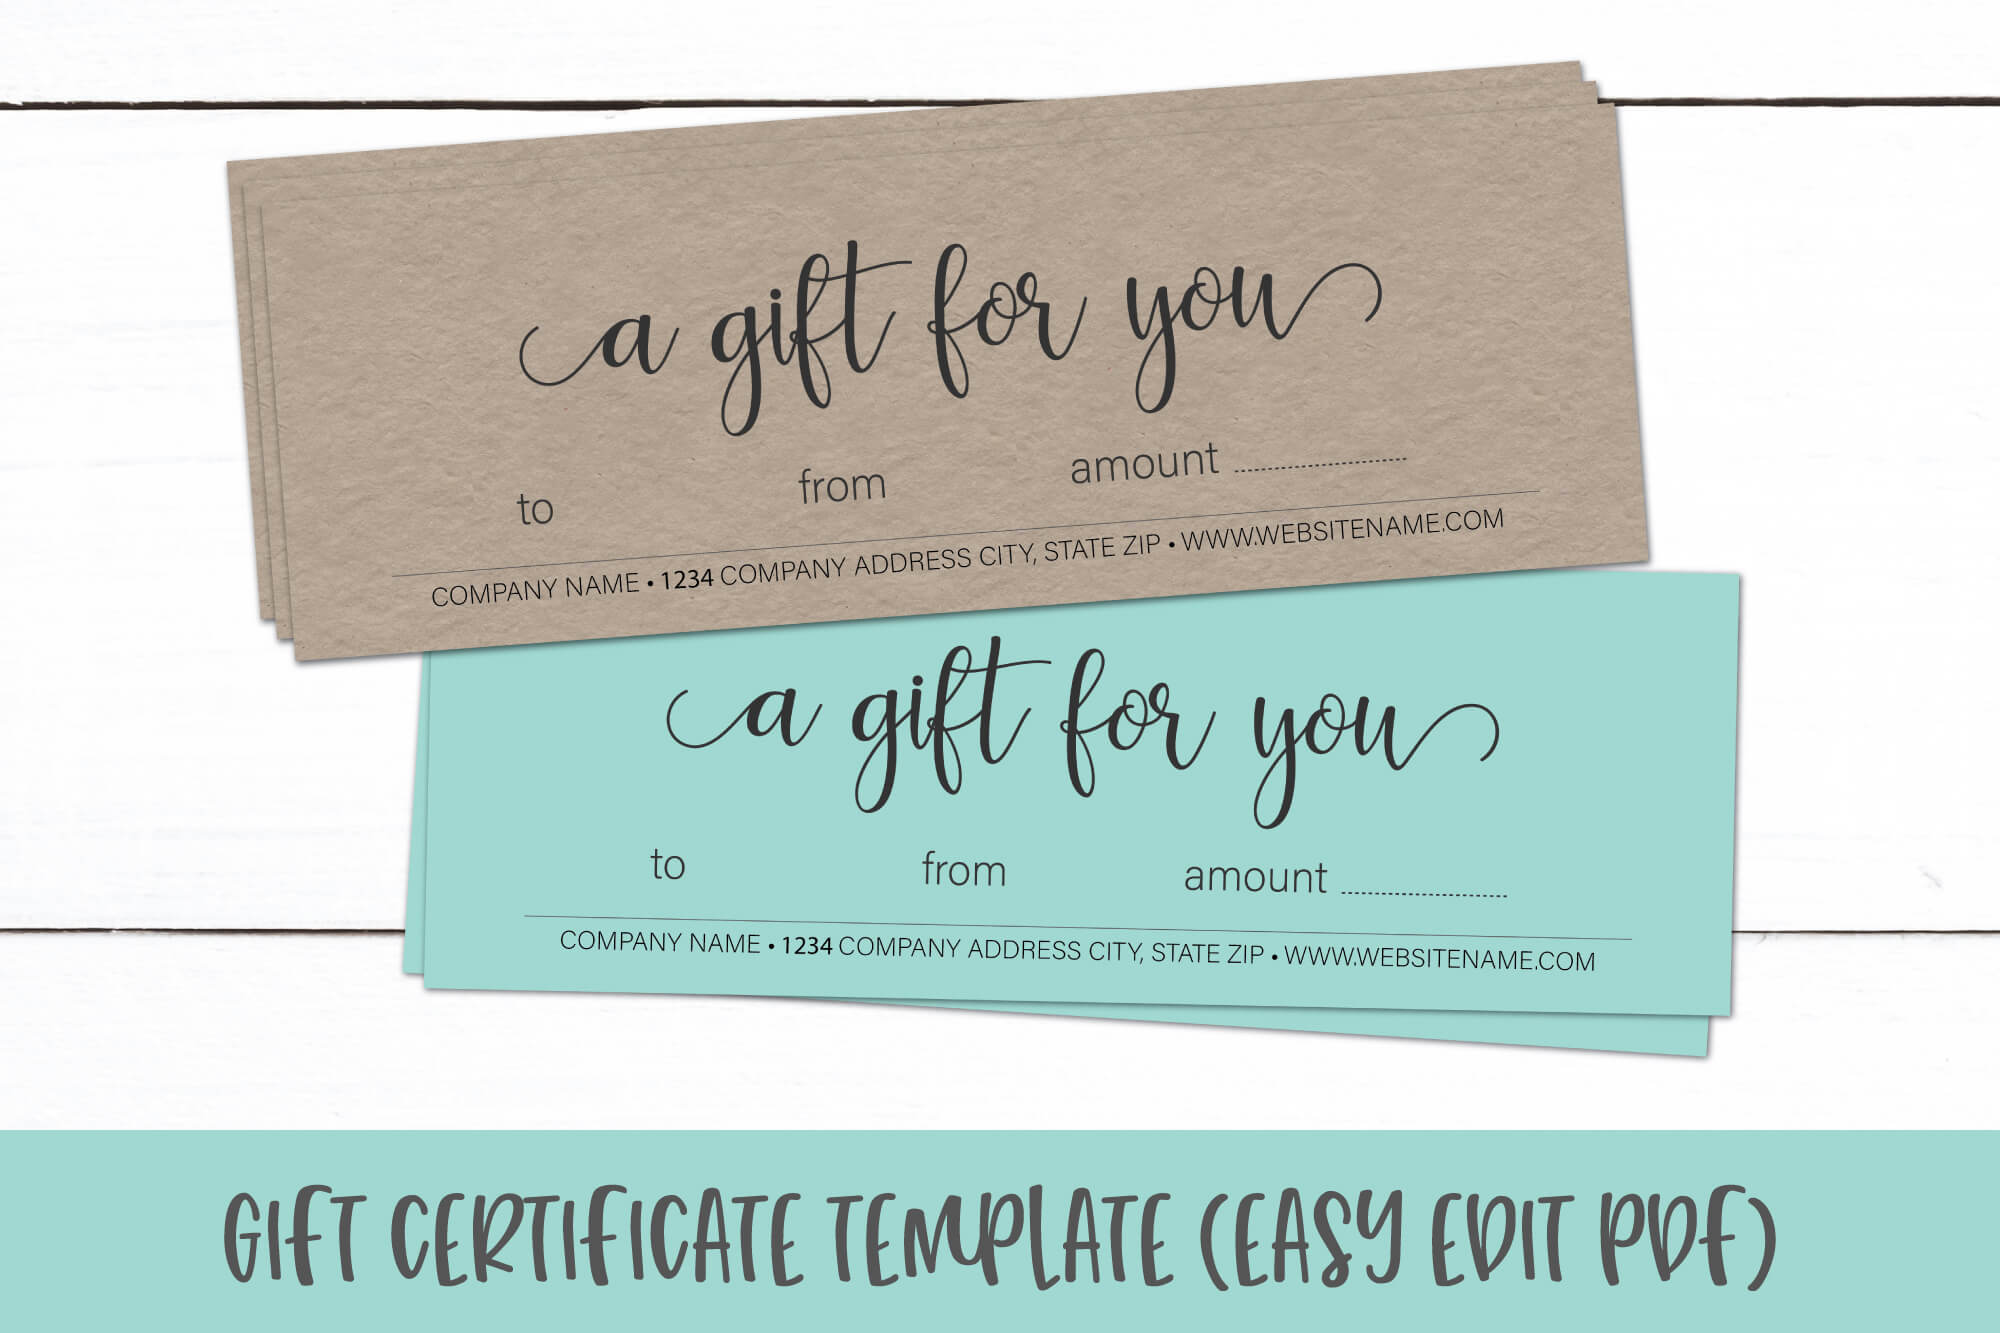 Gift Certificate Template | Editable Gift Card Pdf For Company Gift Certificate Template